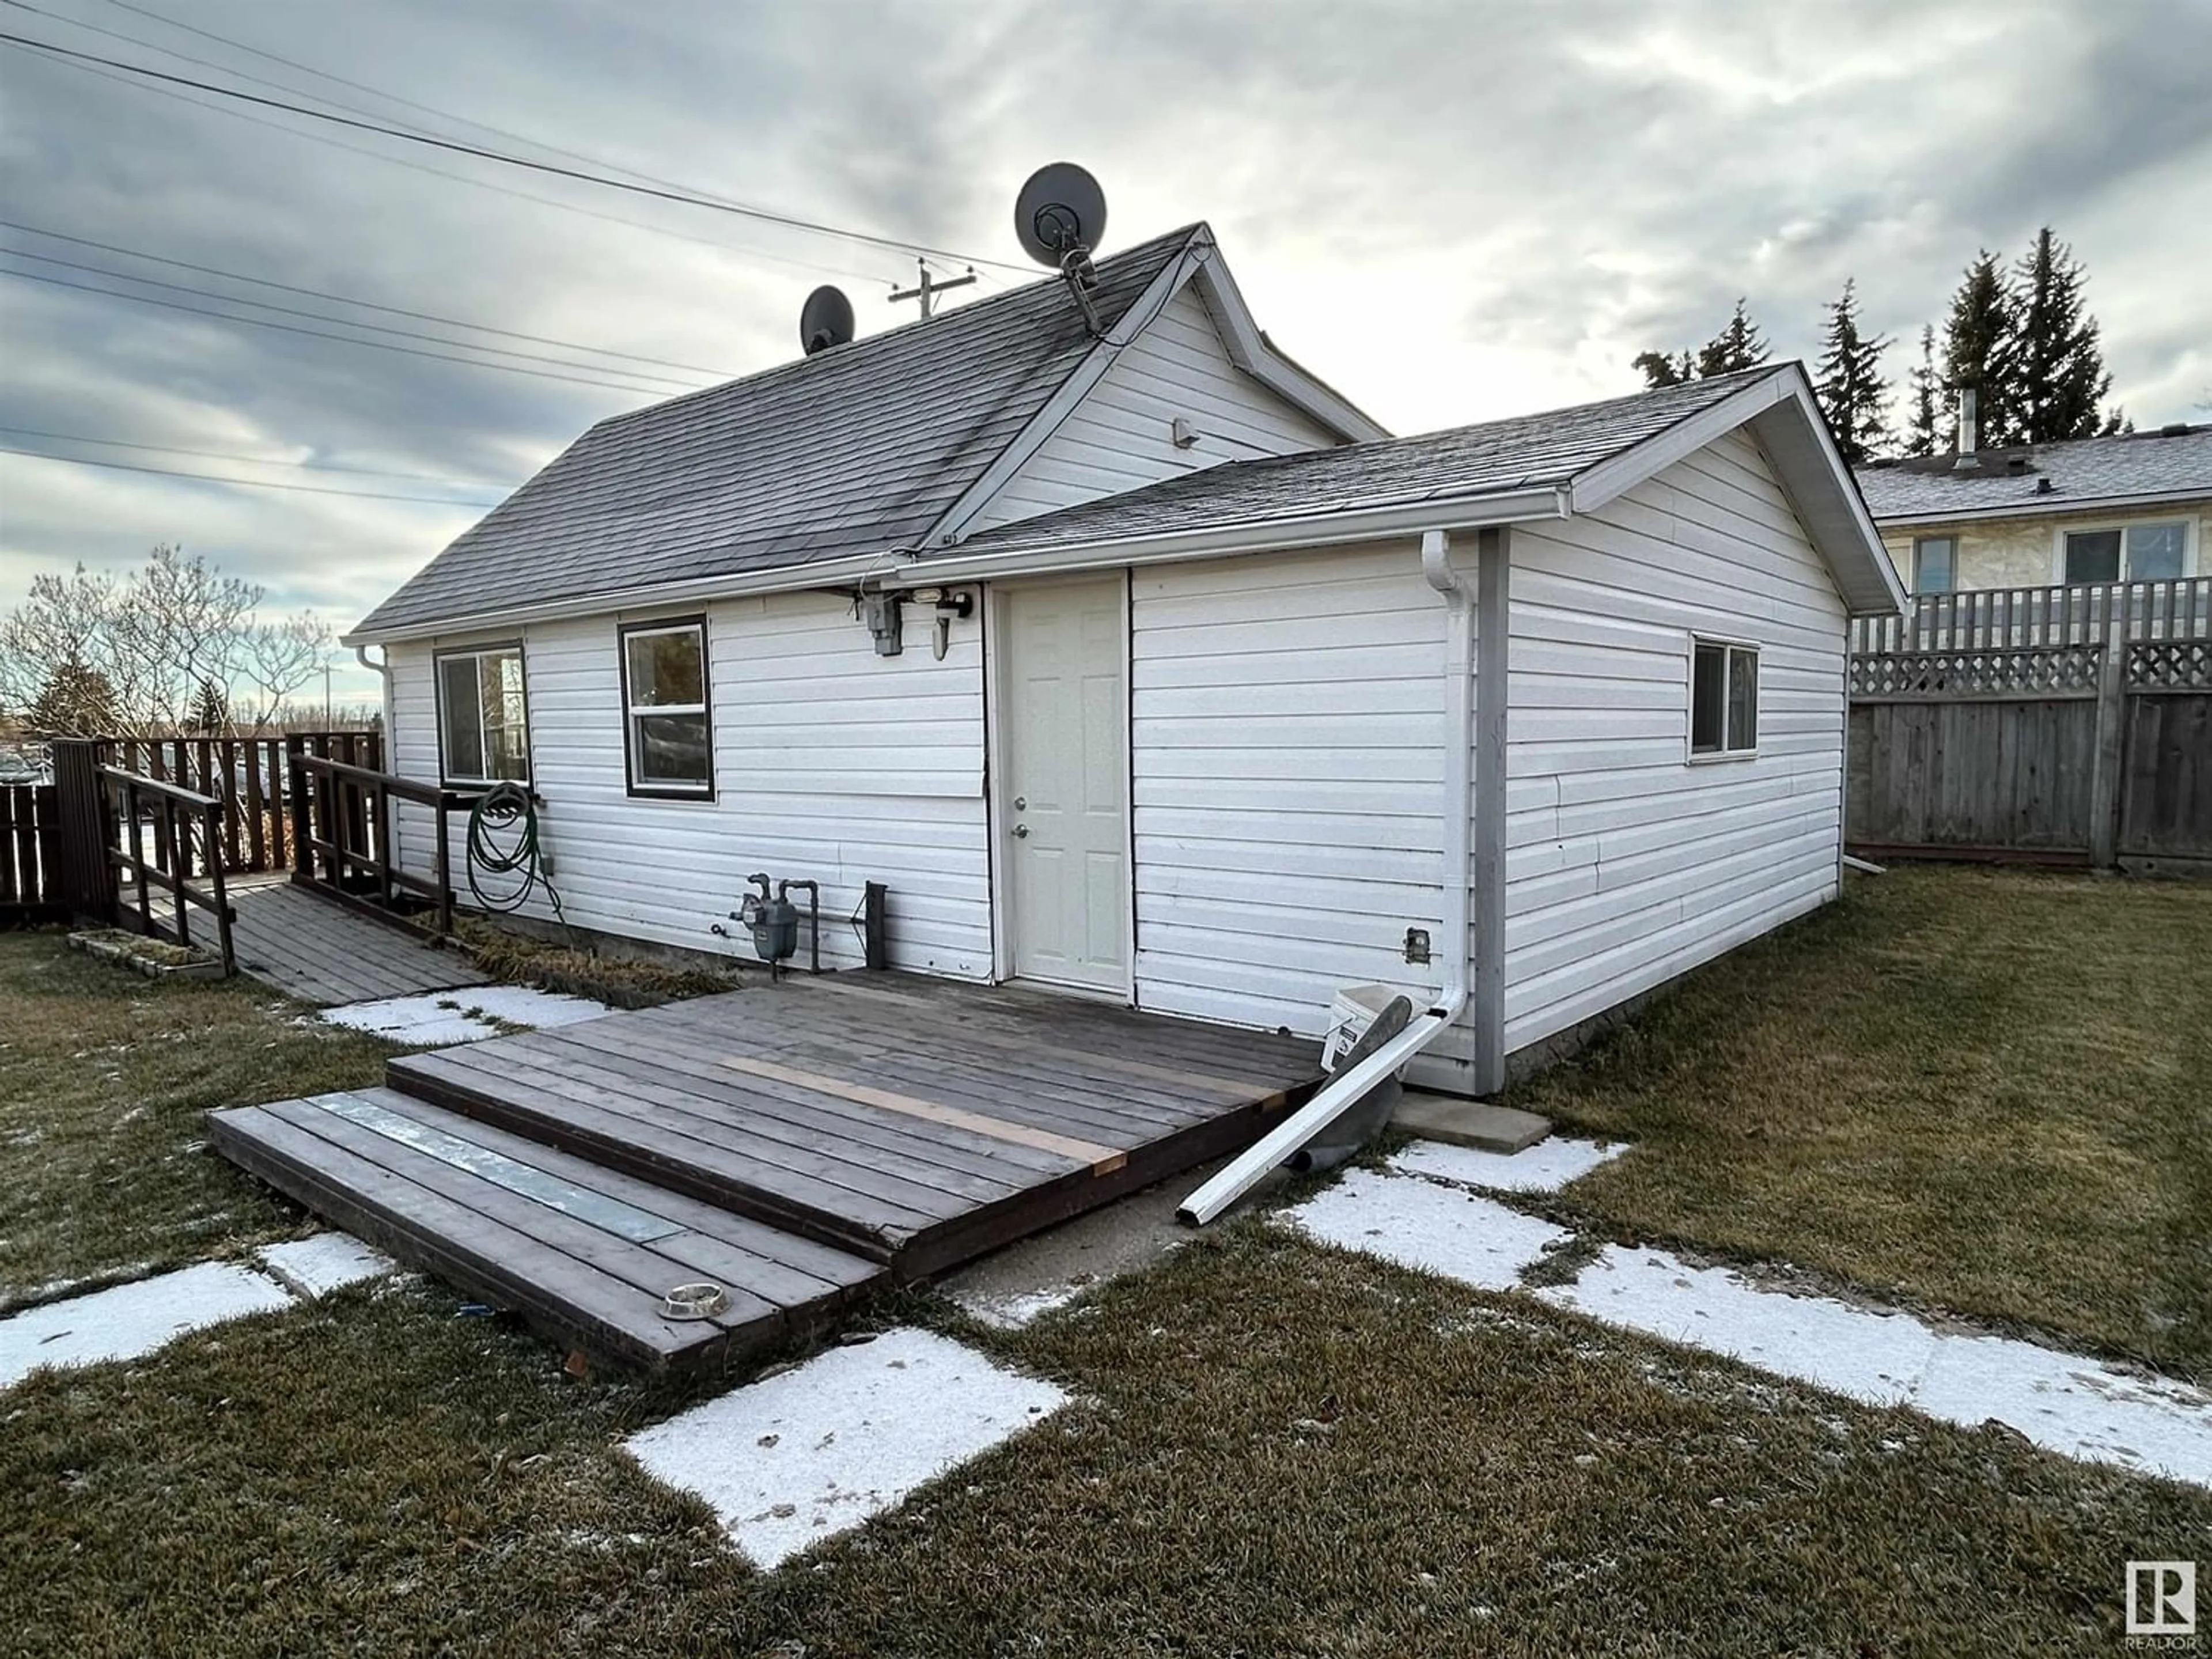 Home with unknown exterior material for 4910 47 ST, Legal Alberta T0G1L0